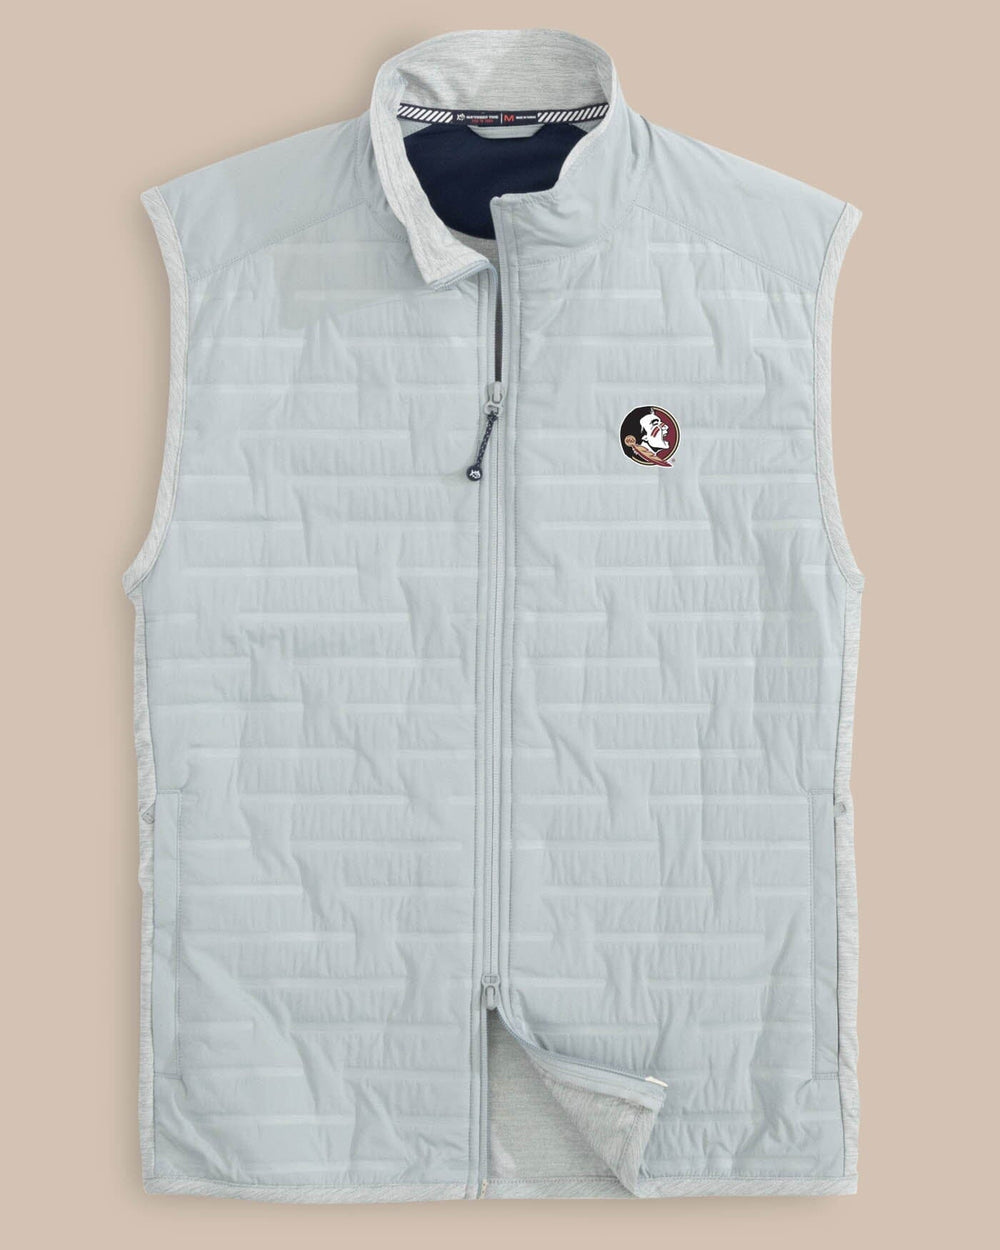 The front view of the Florida State Seminoles Abercorn Vest by Southern Tide - Gravel Grey